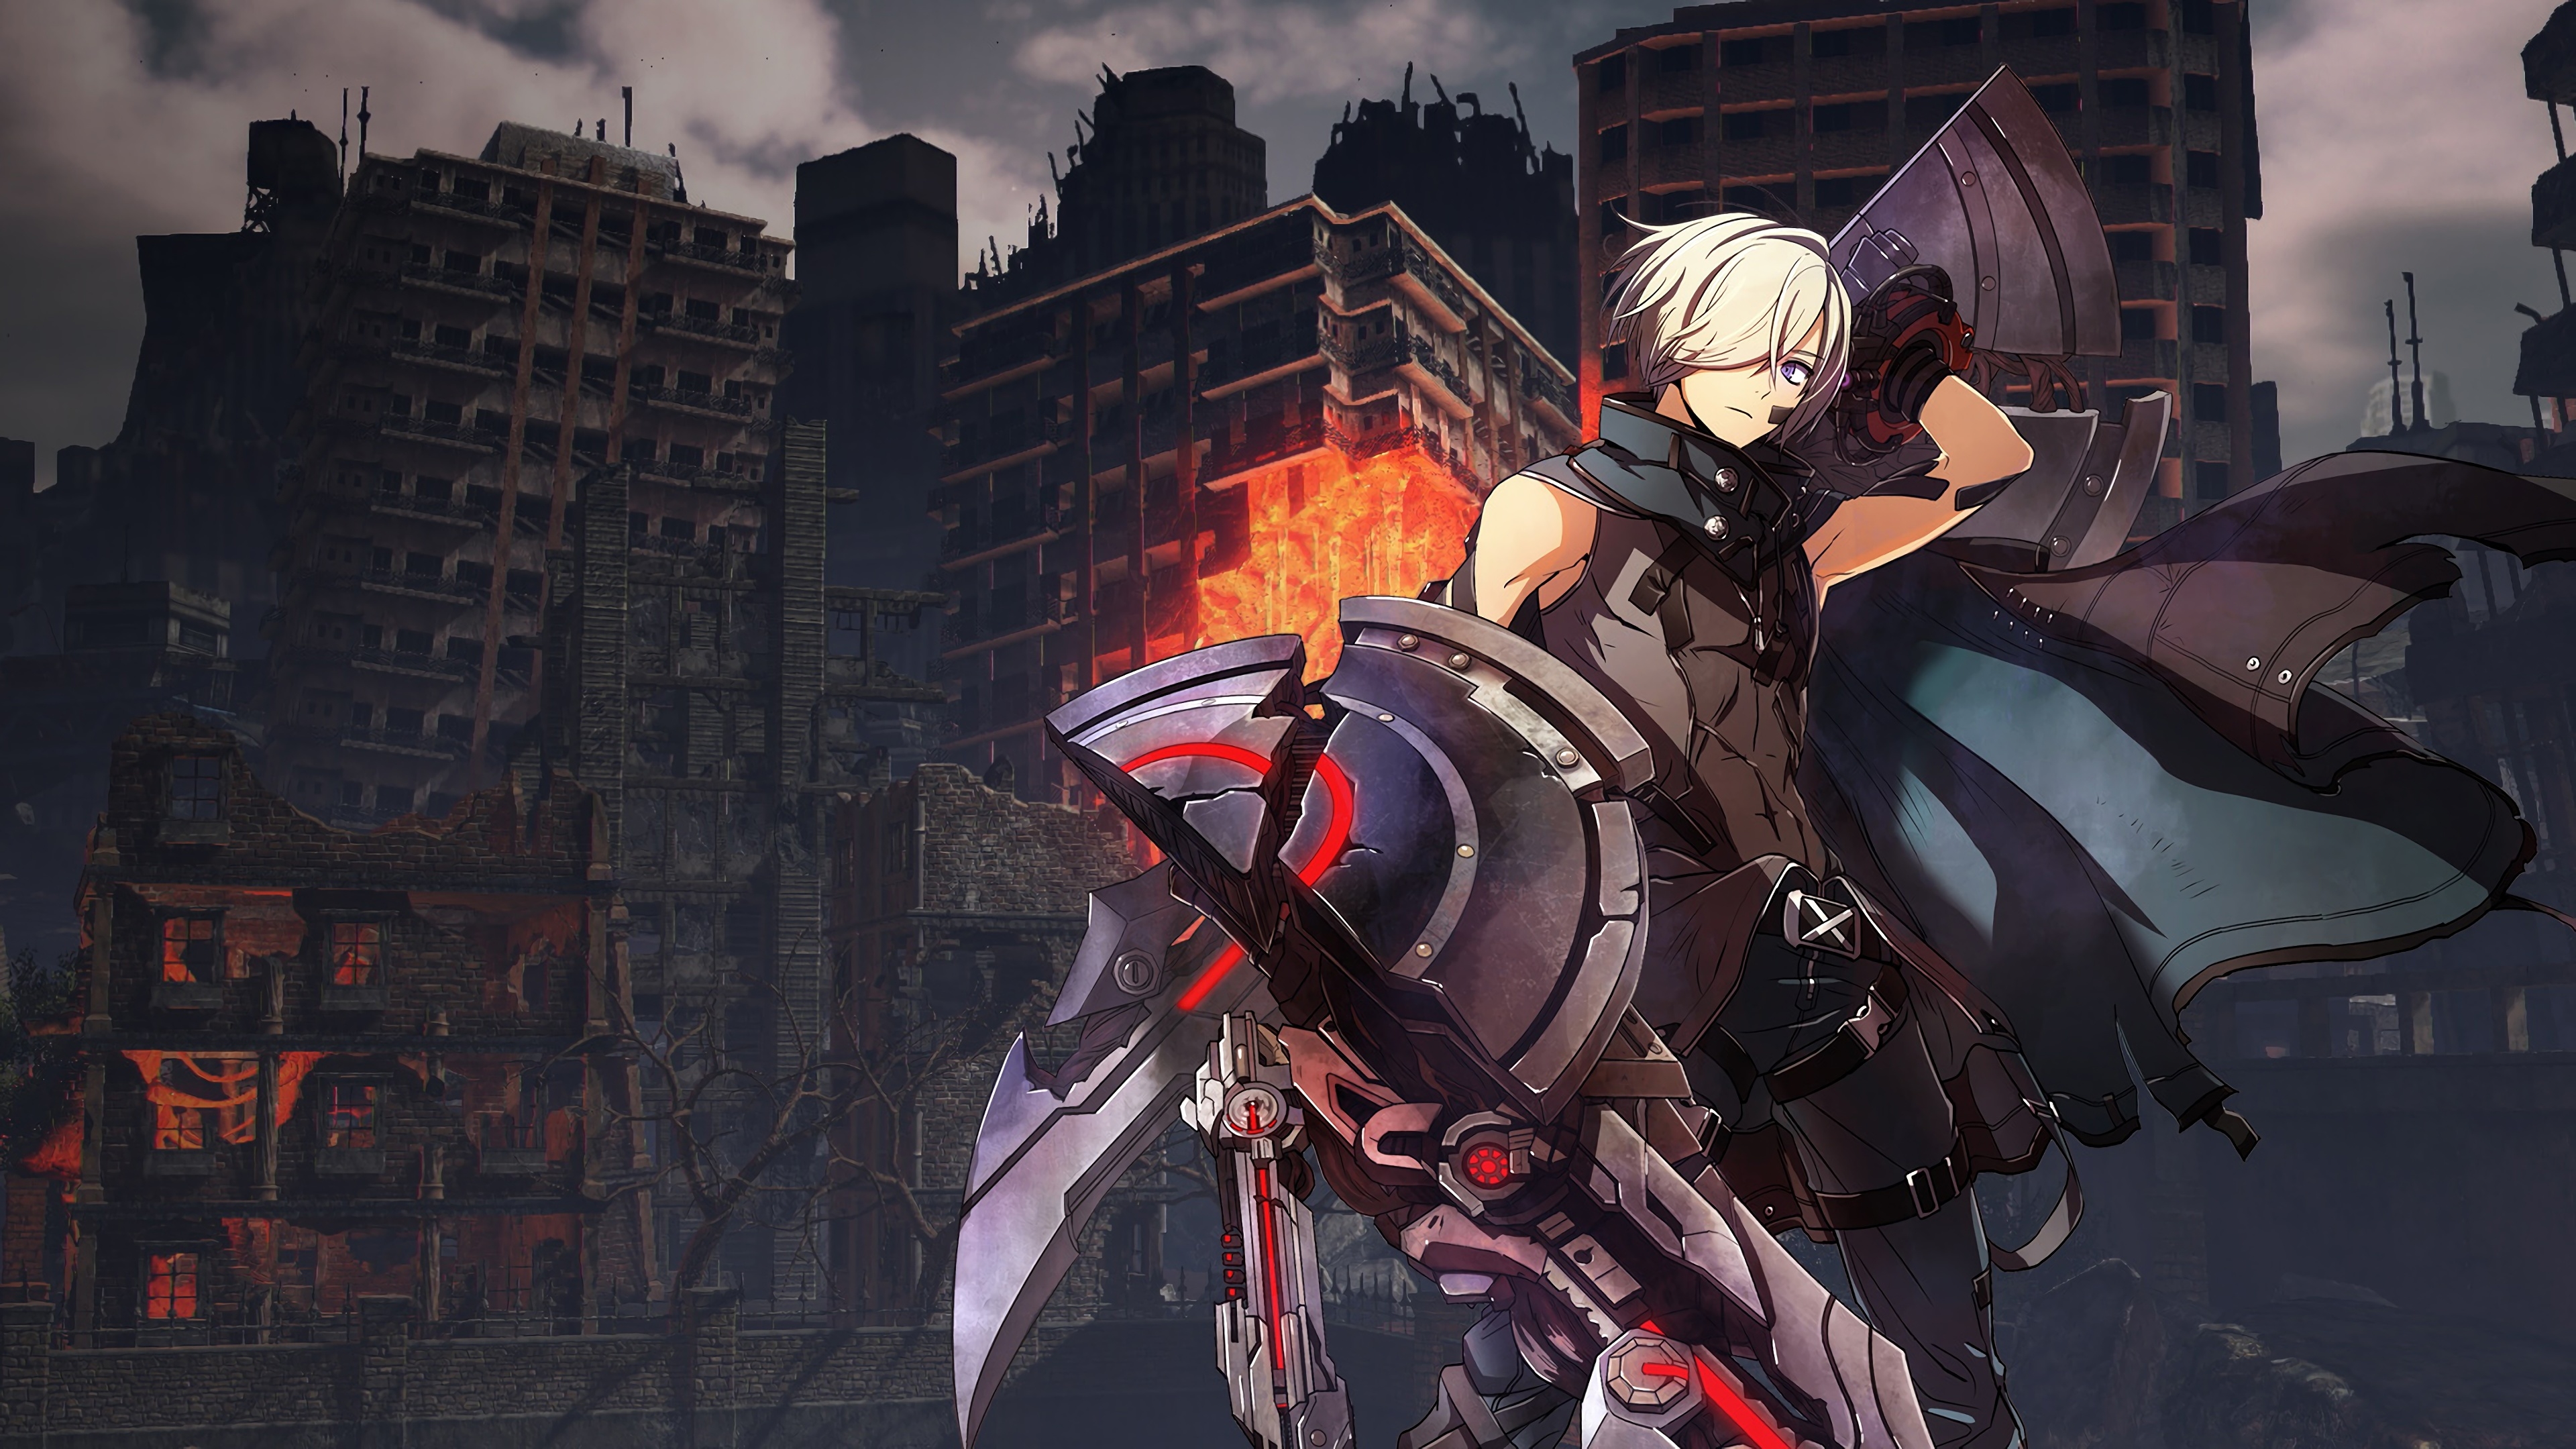 19x God Eater 3 4k 19x Resolution Wallpaper Hd Games 4k Wallpapers Images Photos And Background Wallpapers Den